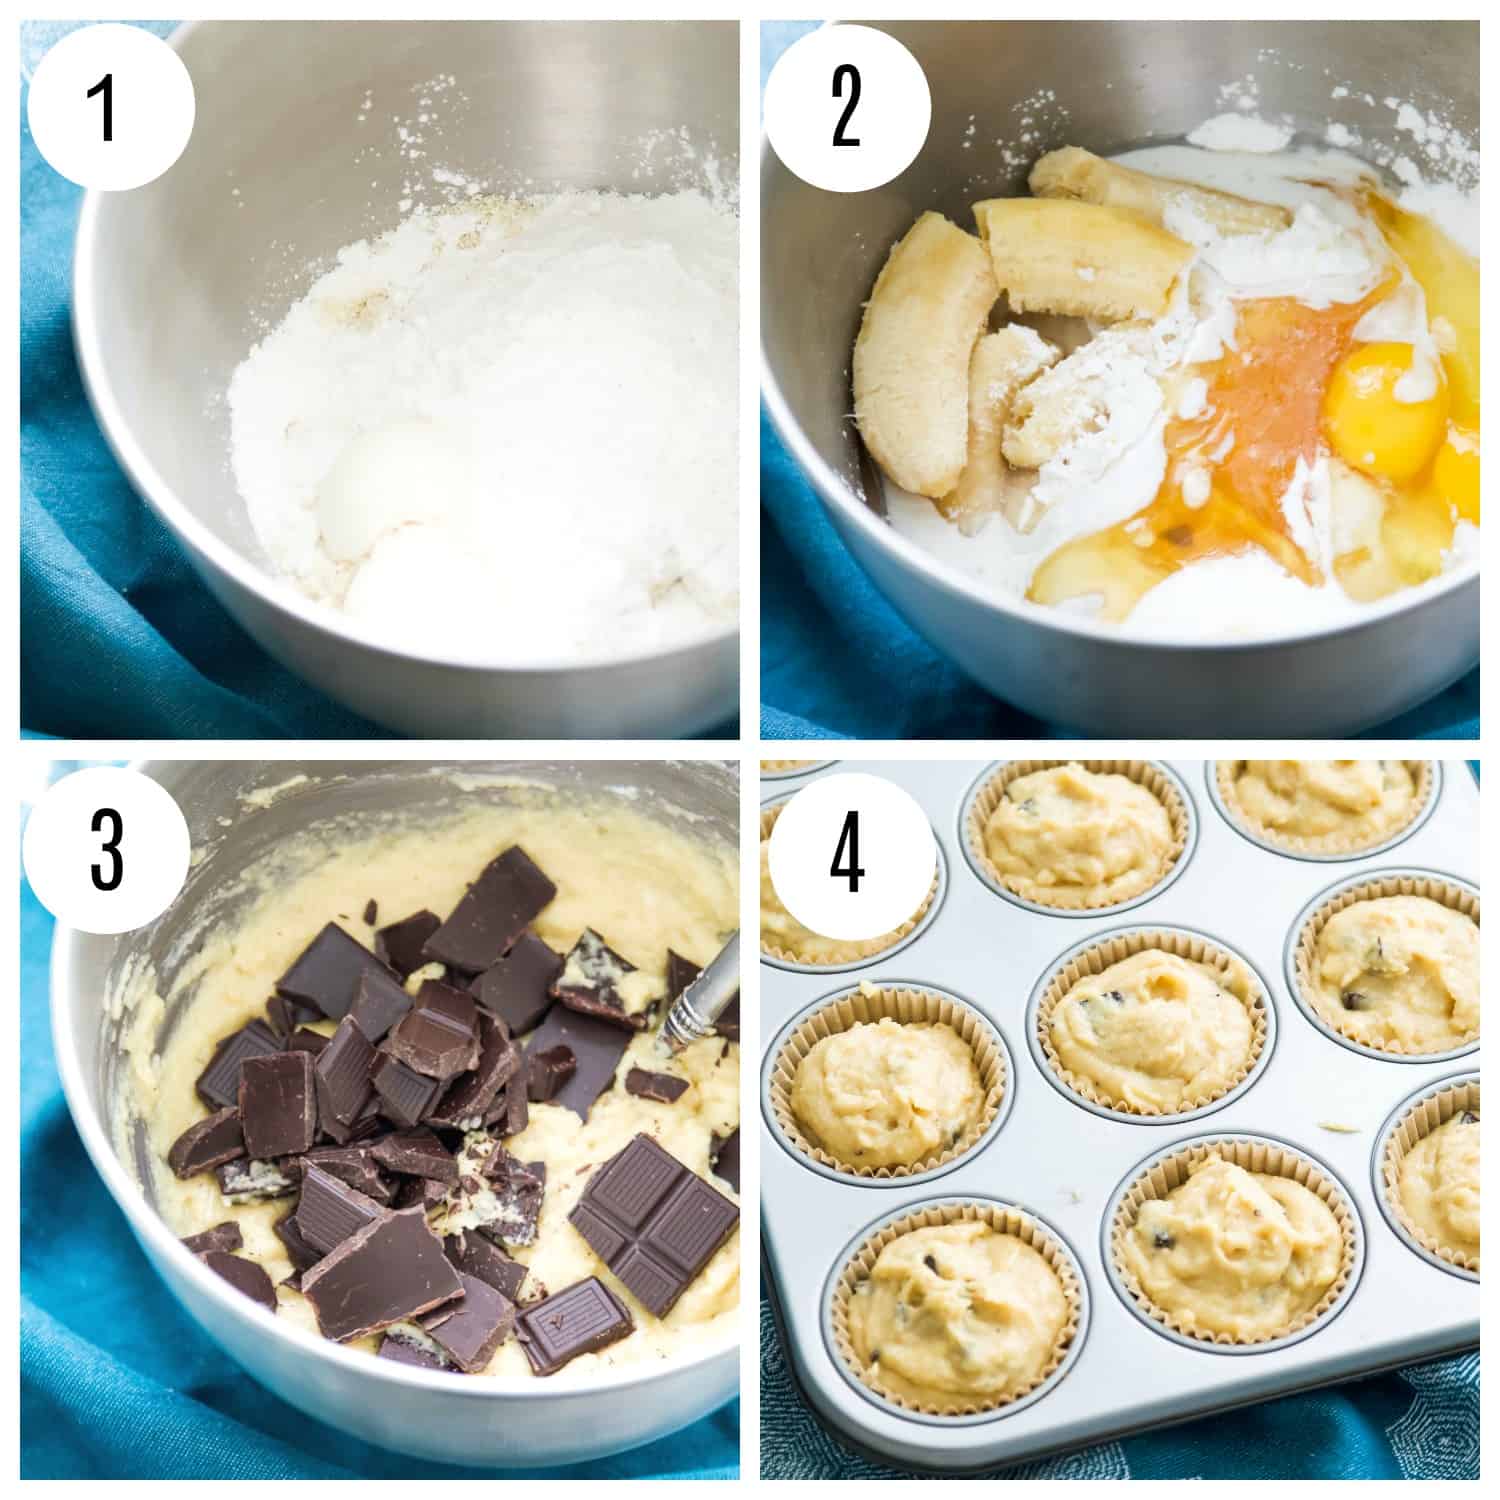 Step by step directions for making banana muffins with chocolate.